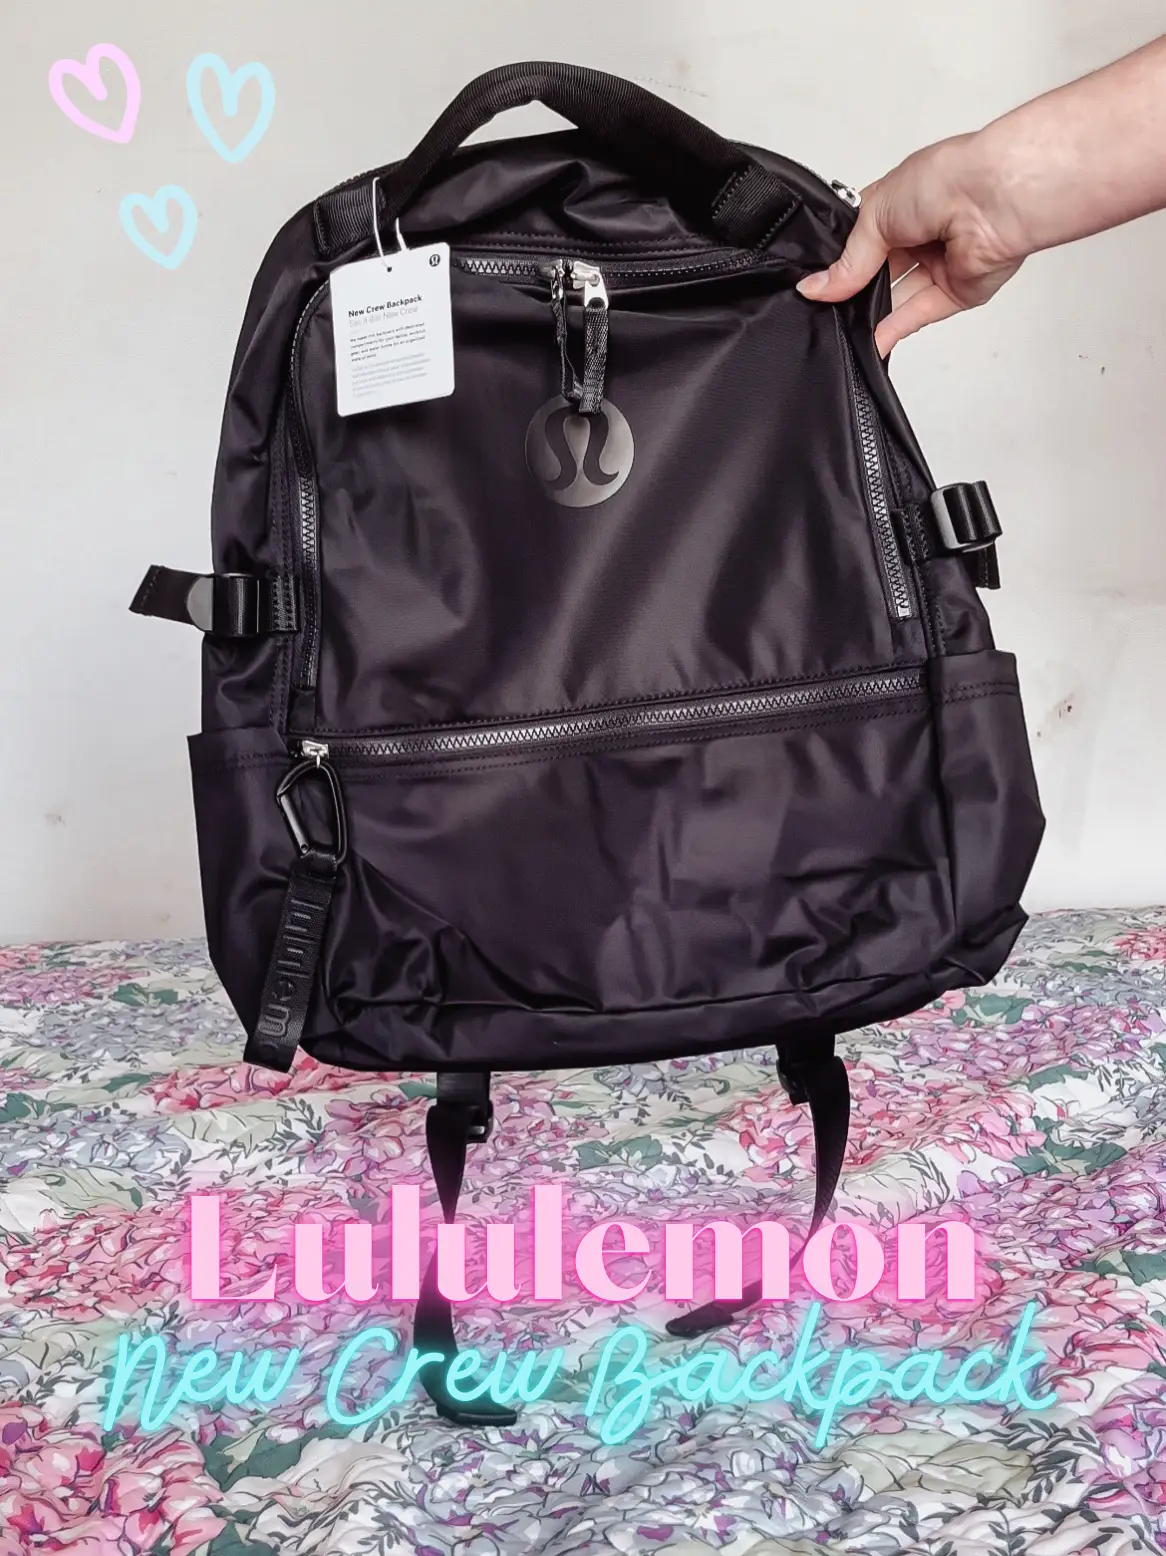 This lululemon Mini Nano Backpack is Small - But Still Holds SO